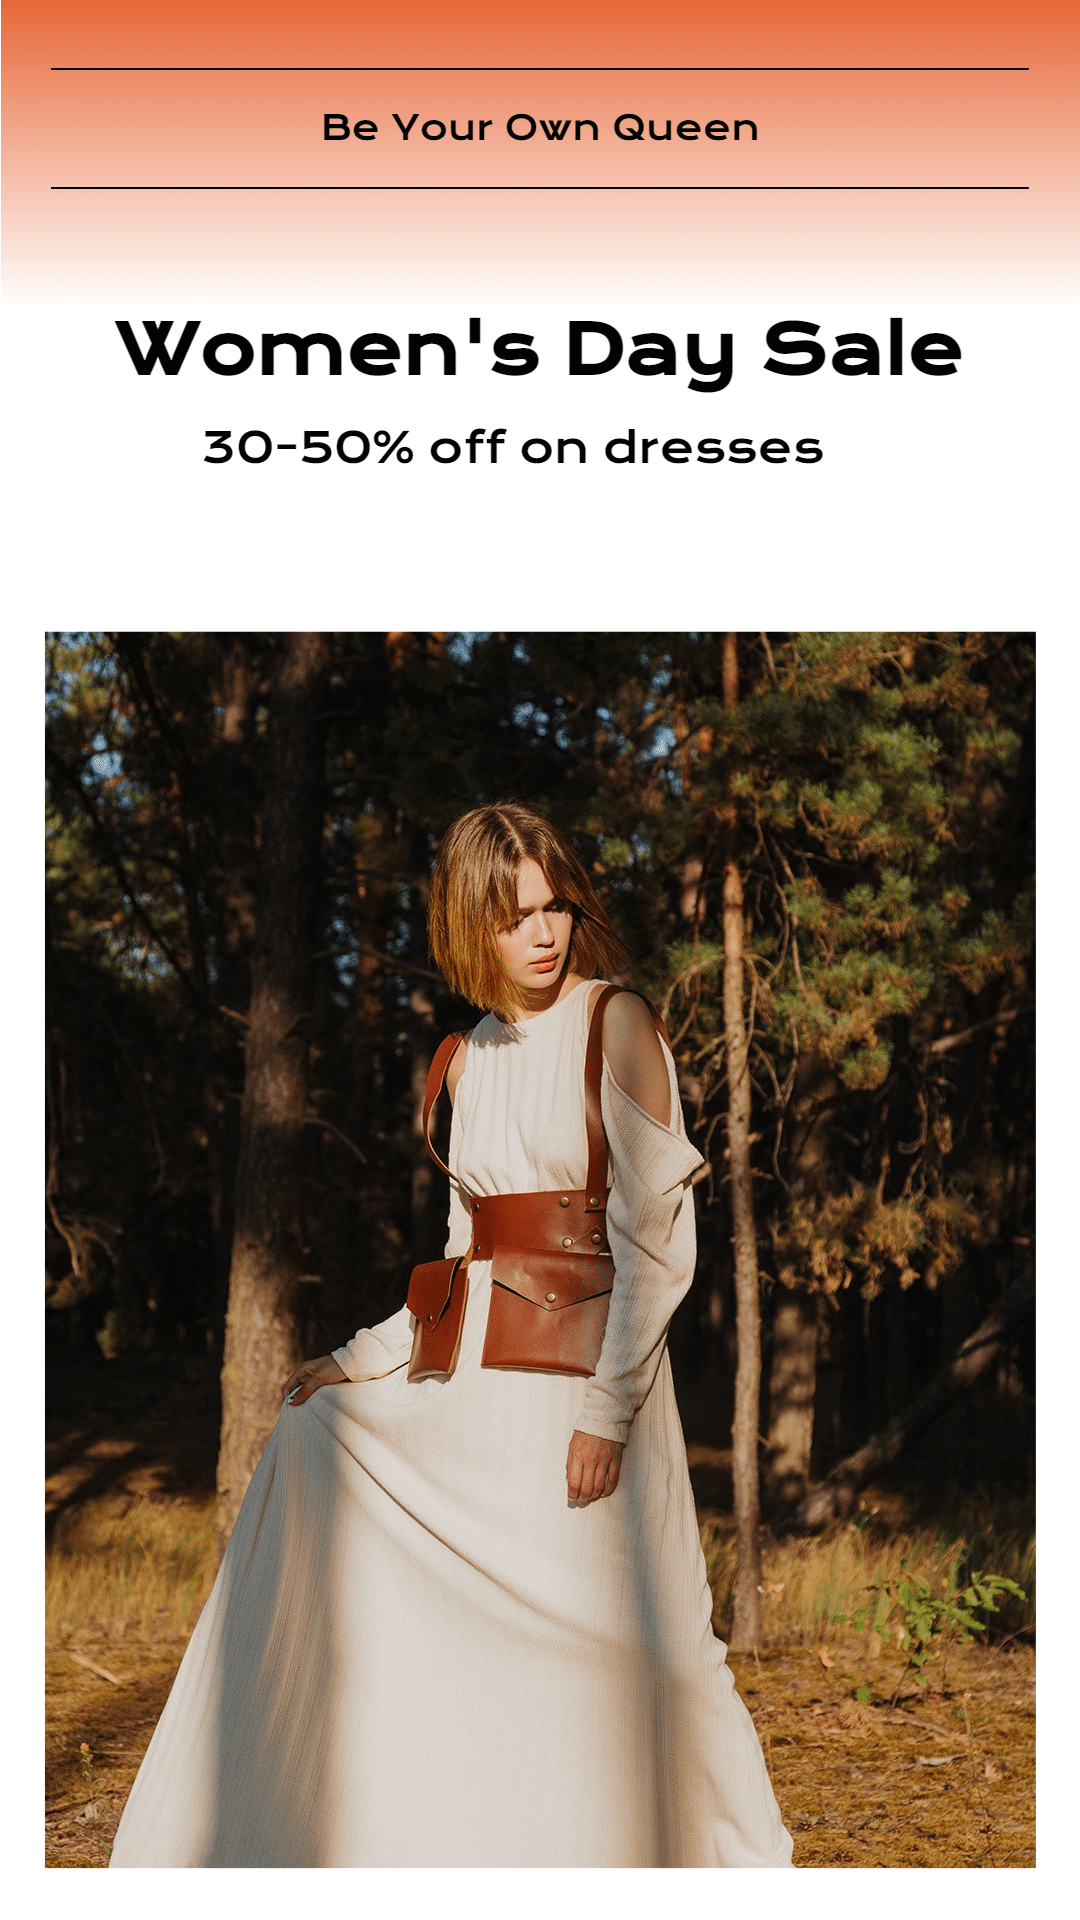 Fashion Women's Day Sale Promotion Dress Display Ecommerce Story